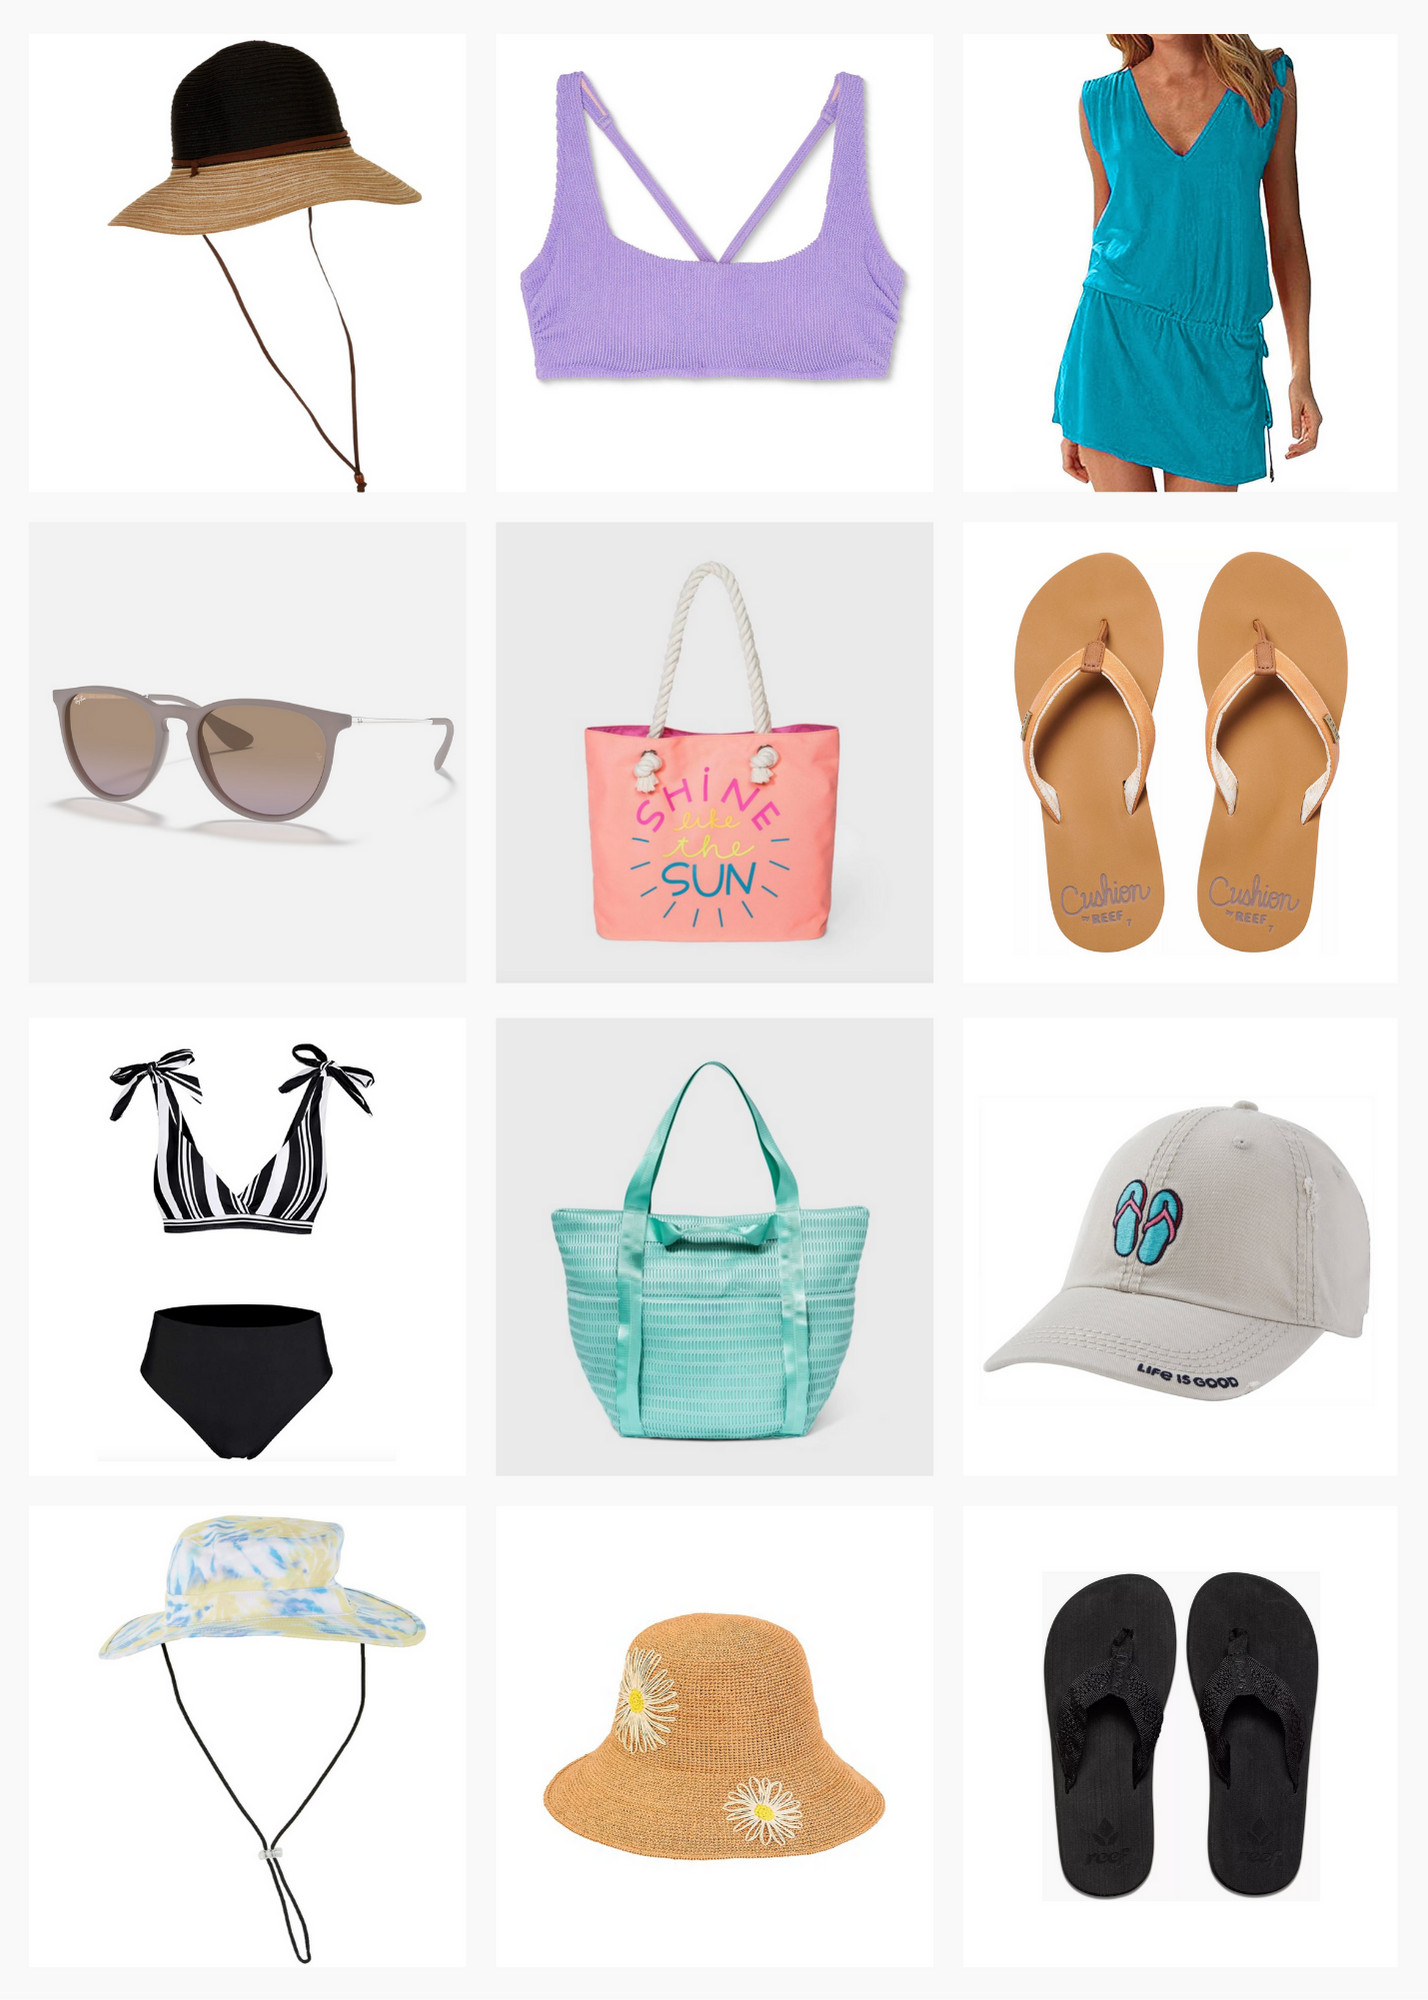 6 Fashion Items You Need For The Beach & Pool